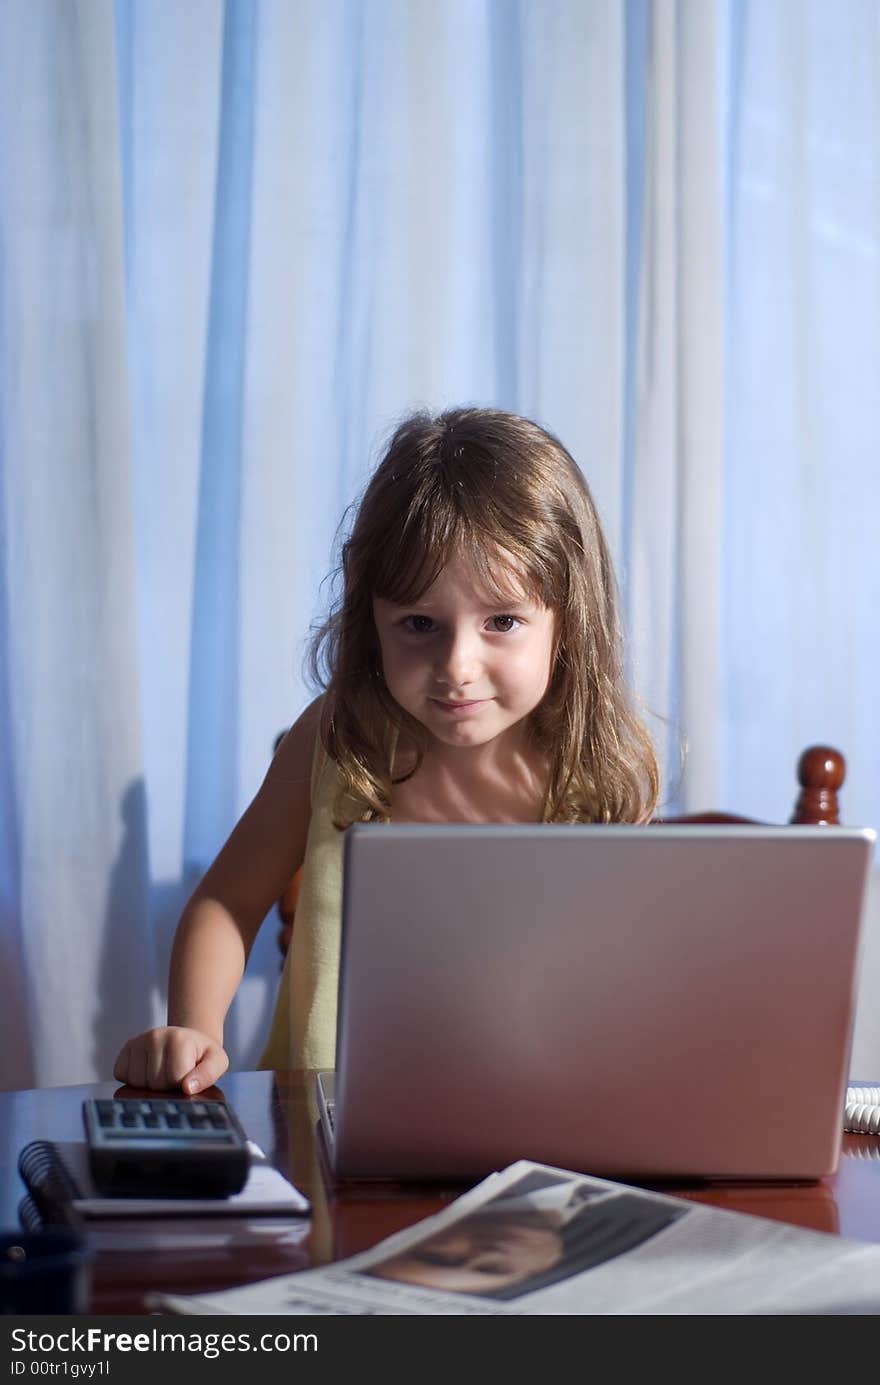 Little girl behind a laptop in a home office. Little girl behind a laptop in a home office